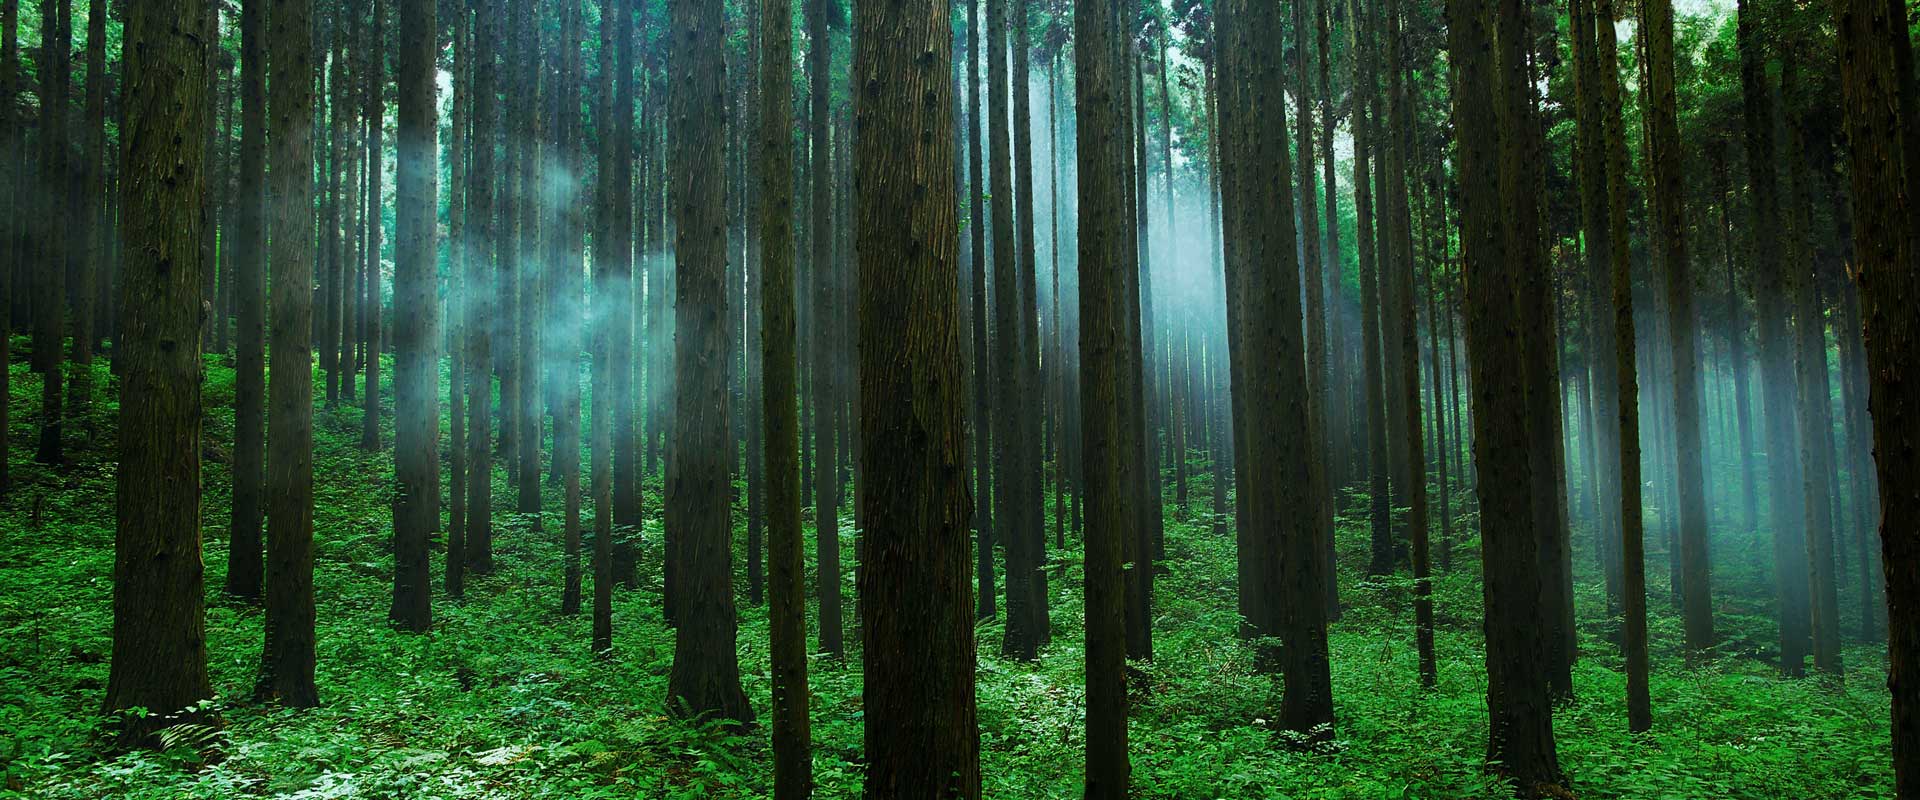 Photo of Japanese forest with many trees